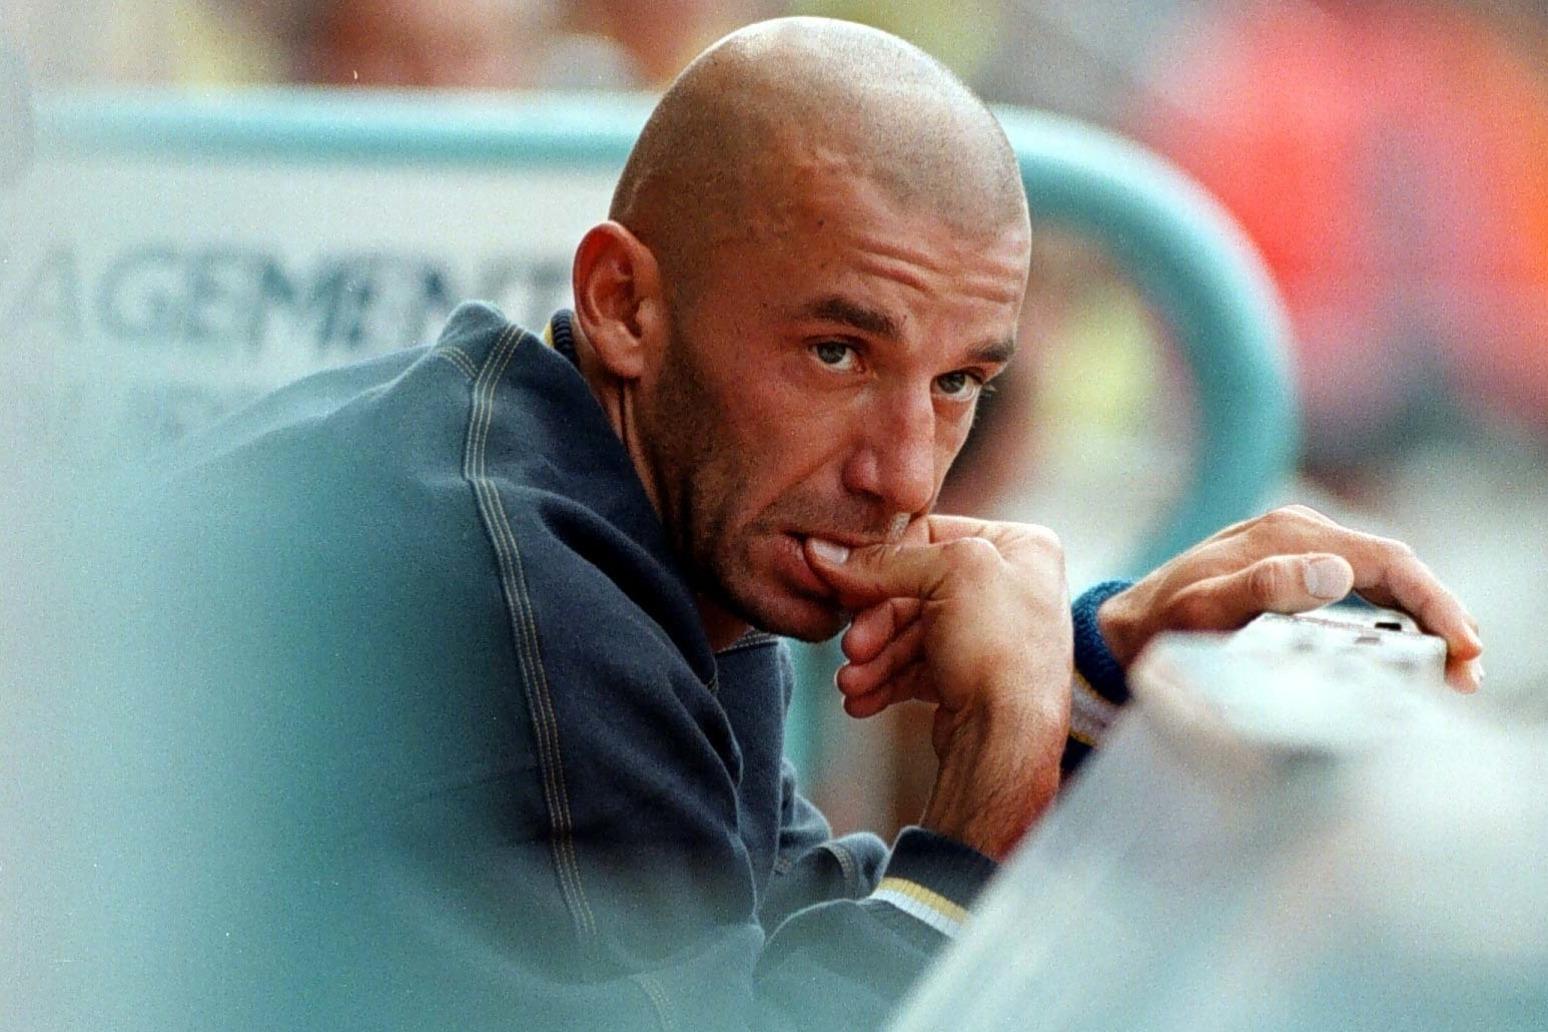 Gianluca Vialli dies aged 58 after battle with cancer - Banbury FM